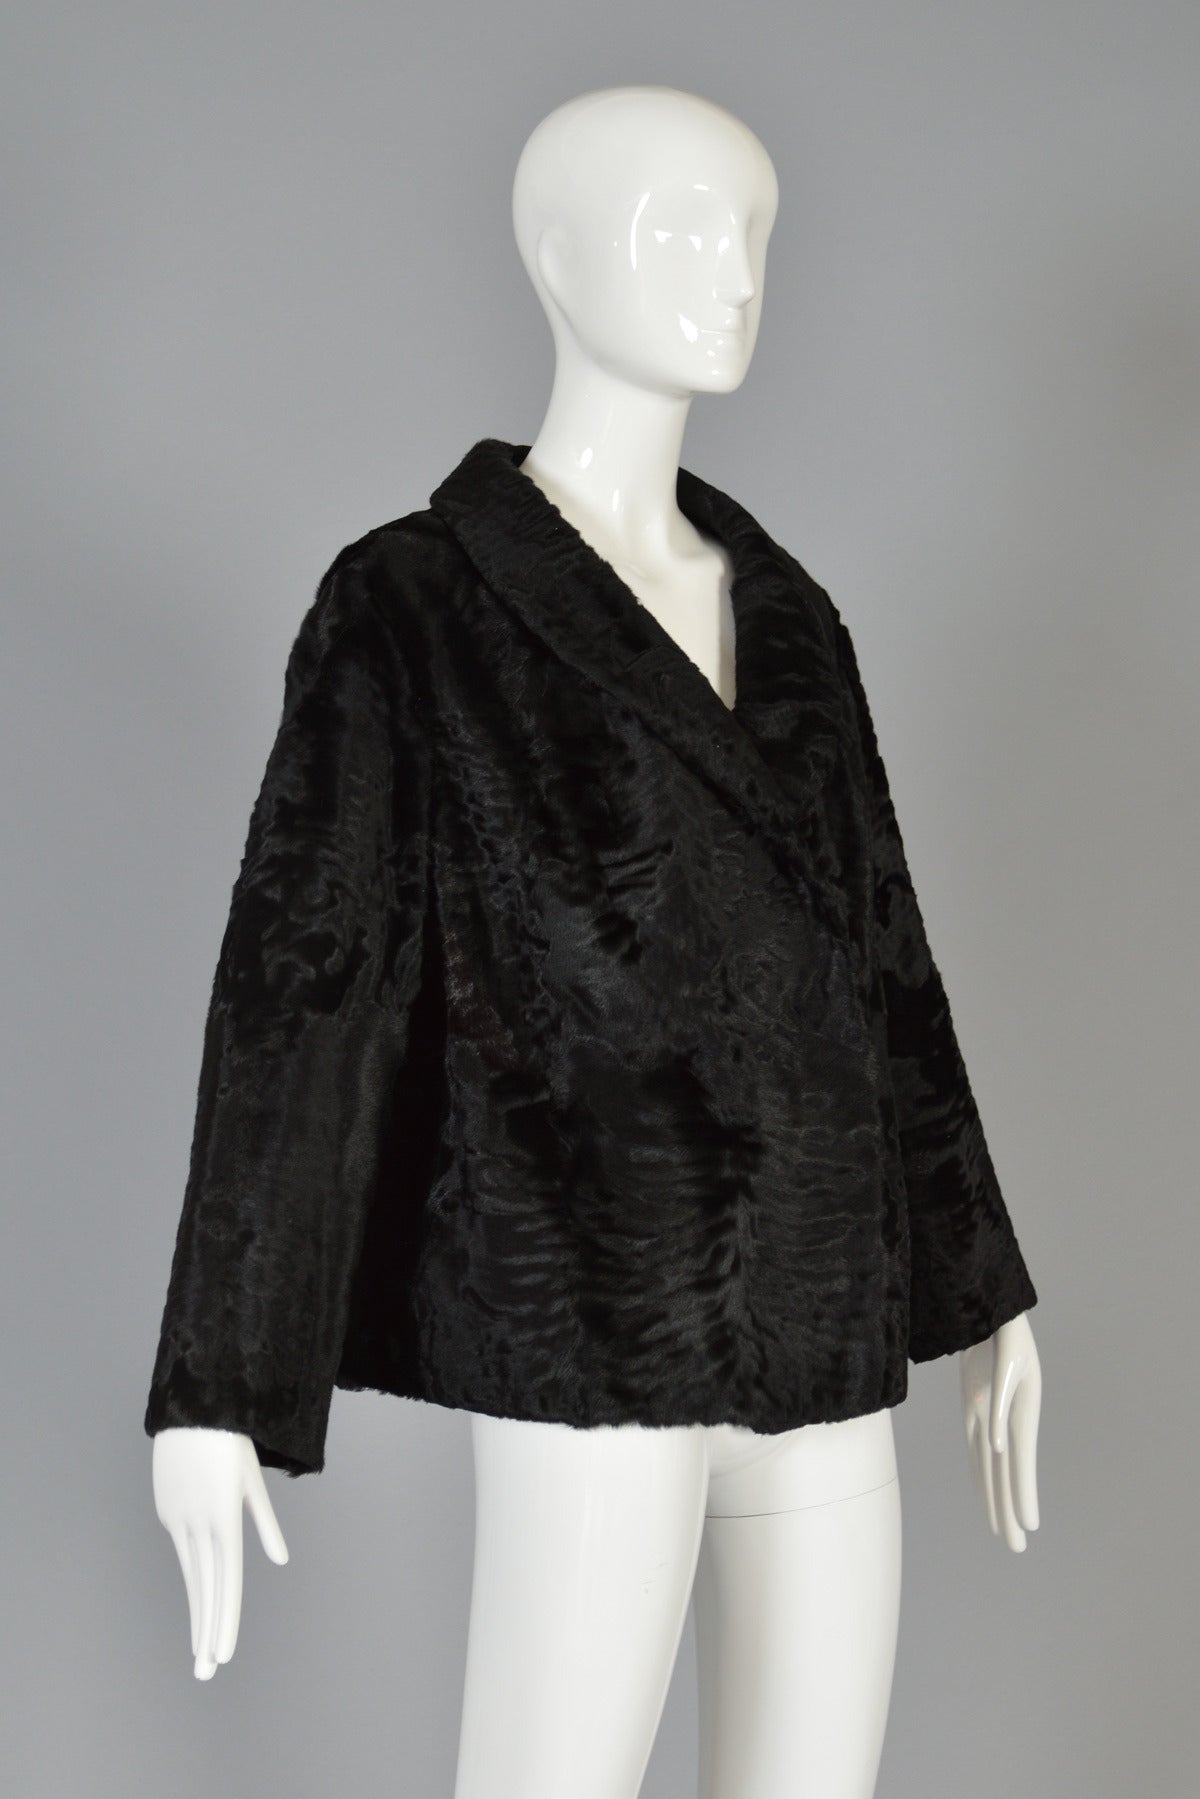 Black Luxe 1950's Cropped Broadtail Fur Jacket